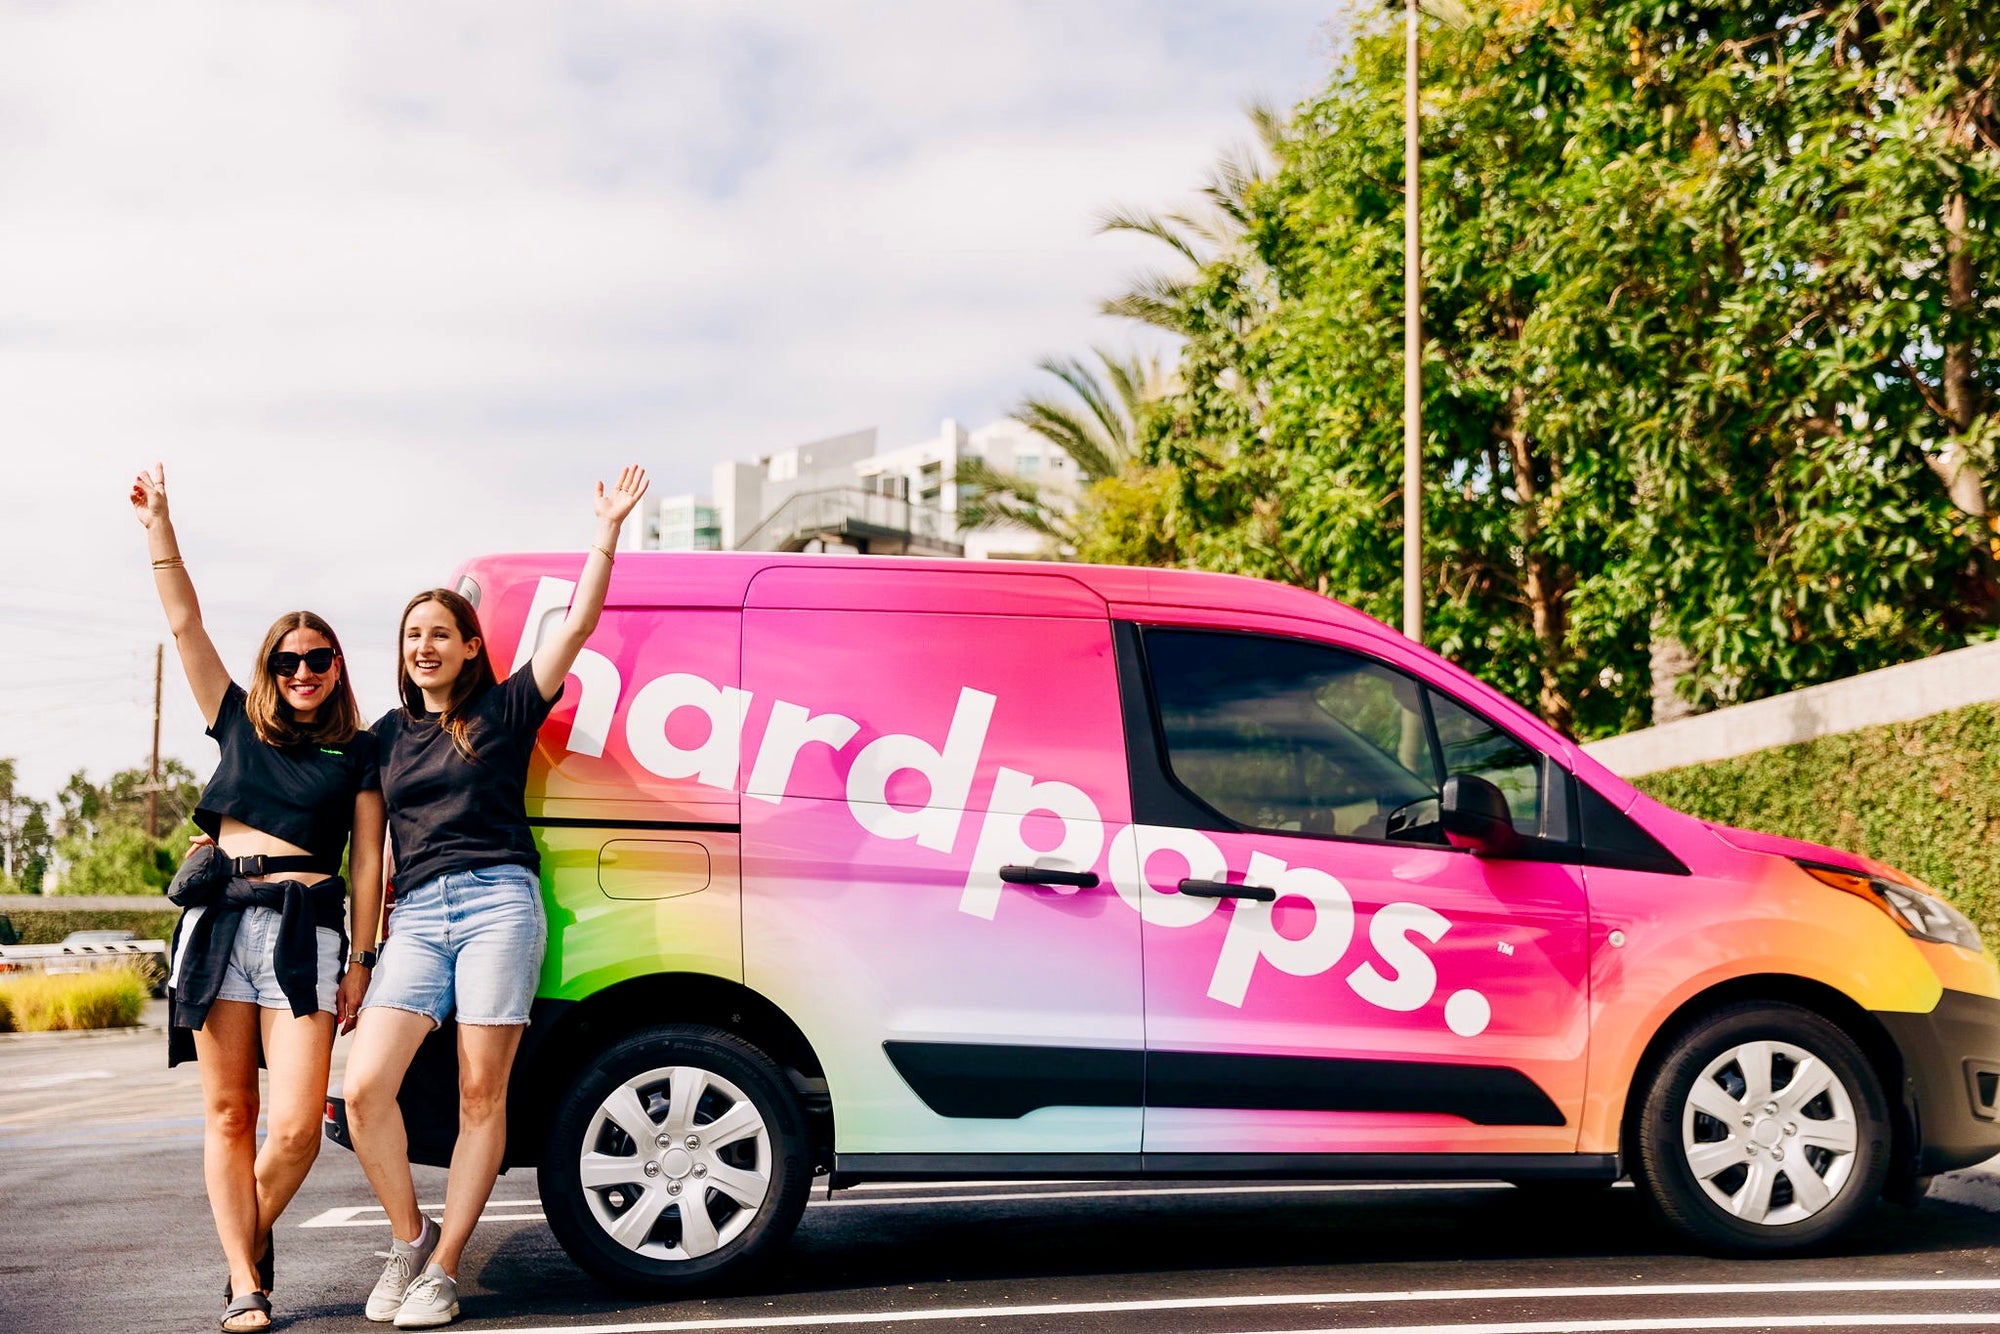 hardpops origin story - founders Gabrielle Mustapich and Sheereen Price with the hardpops mobile